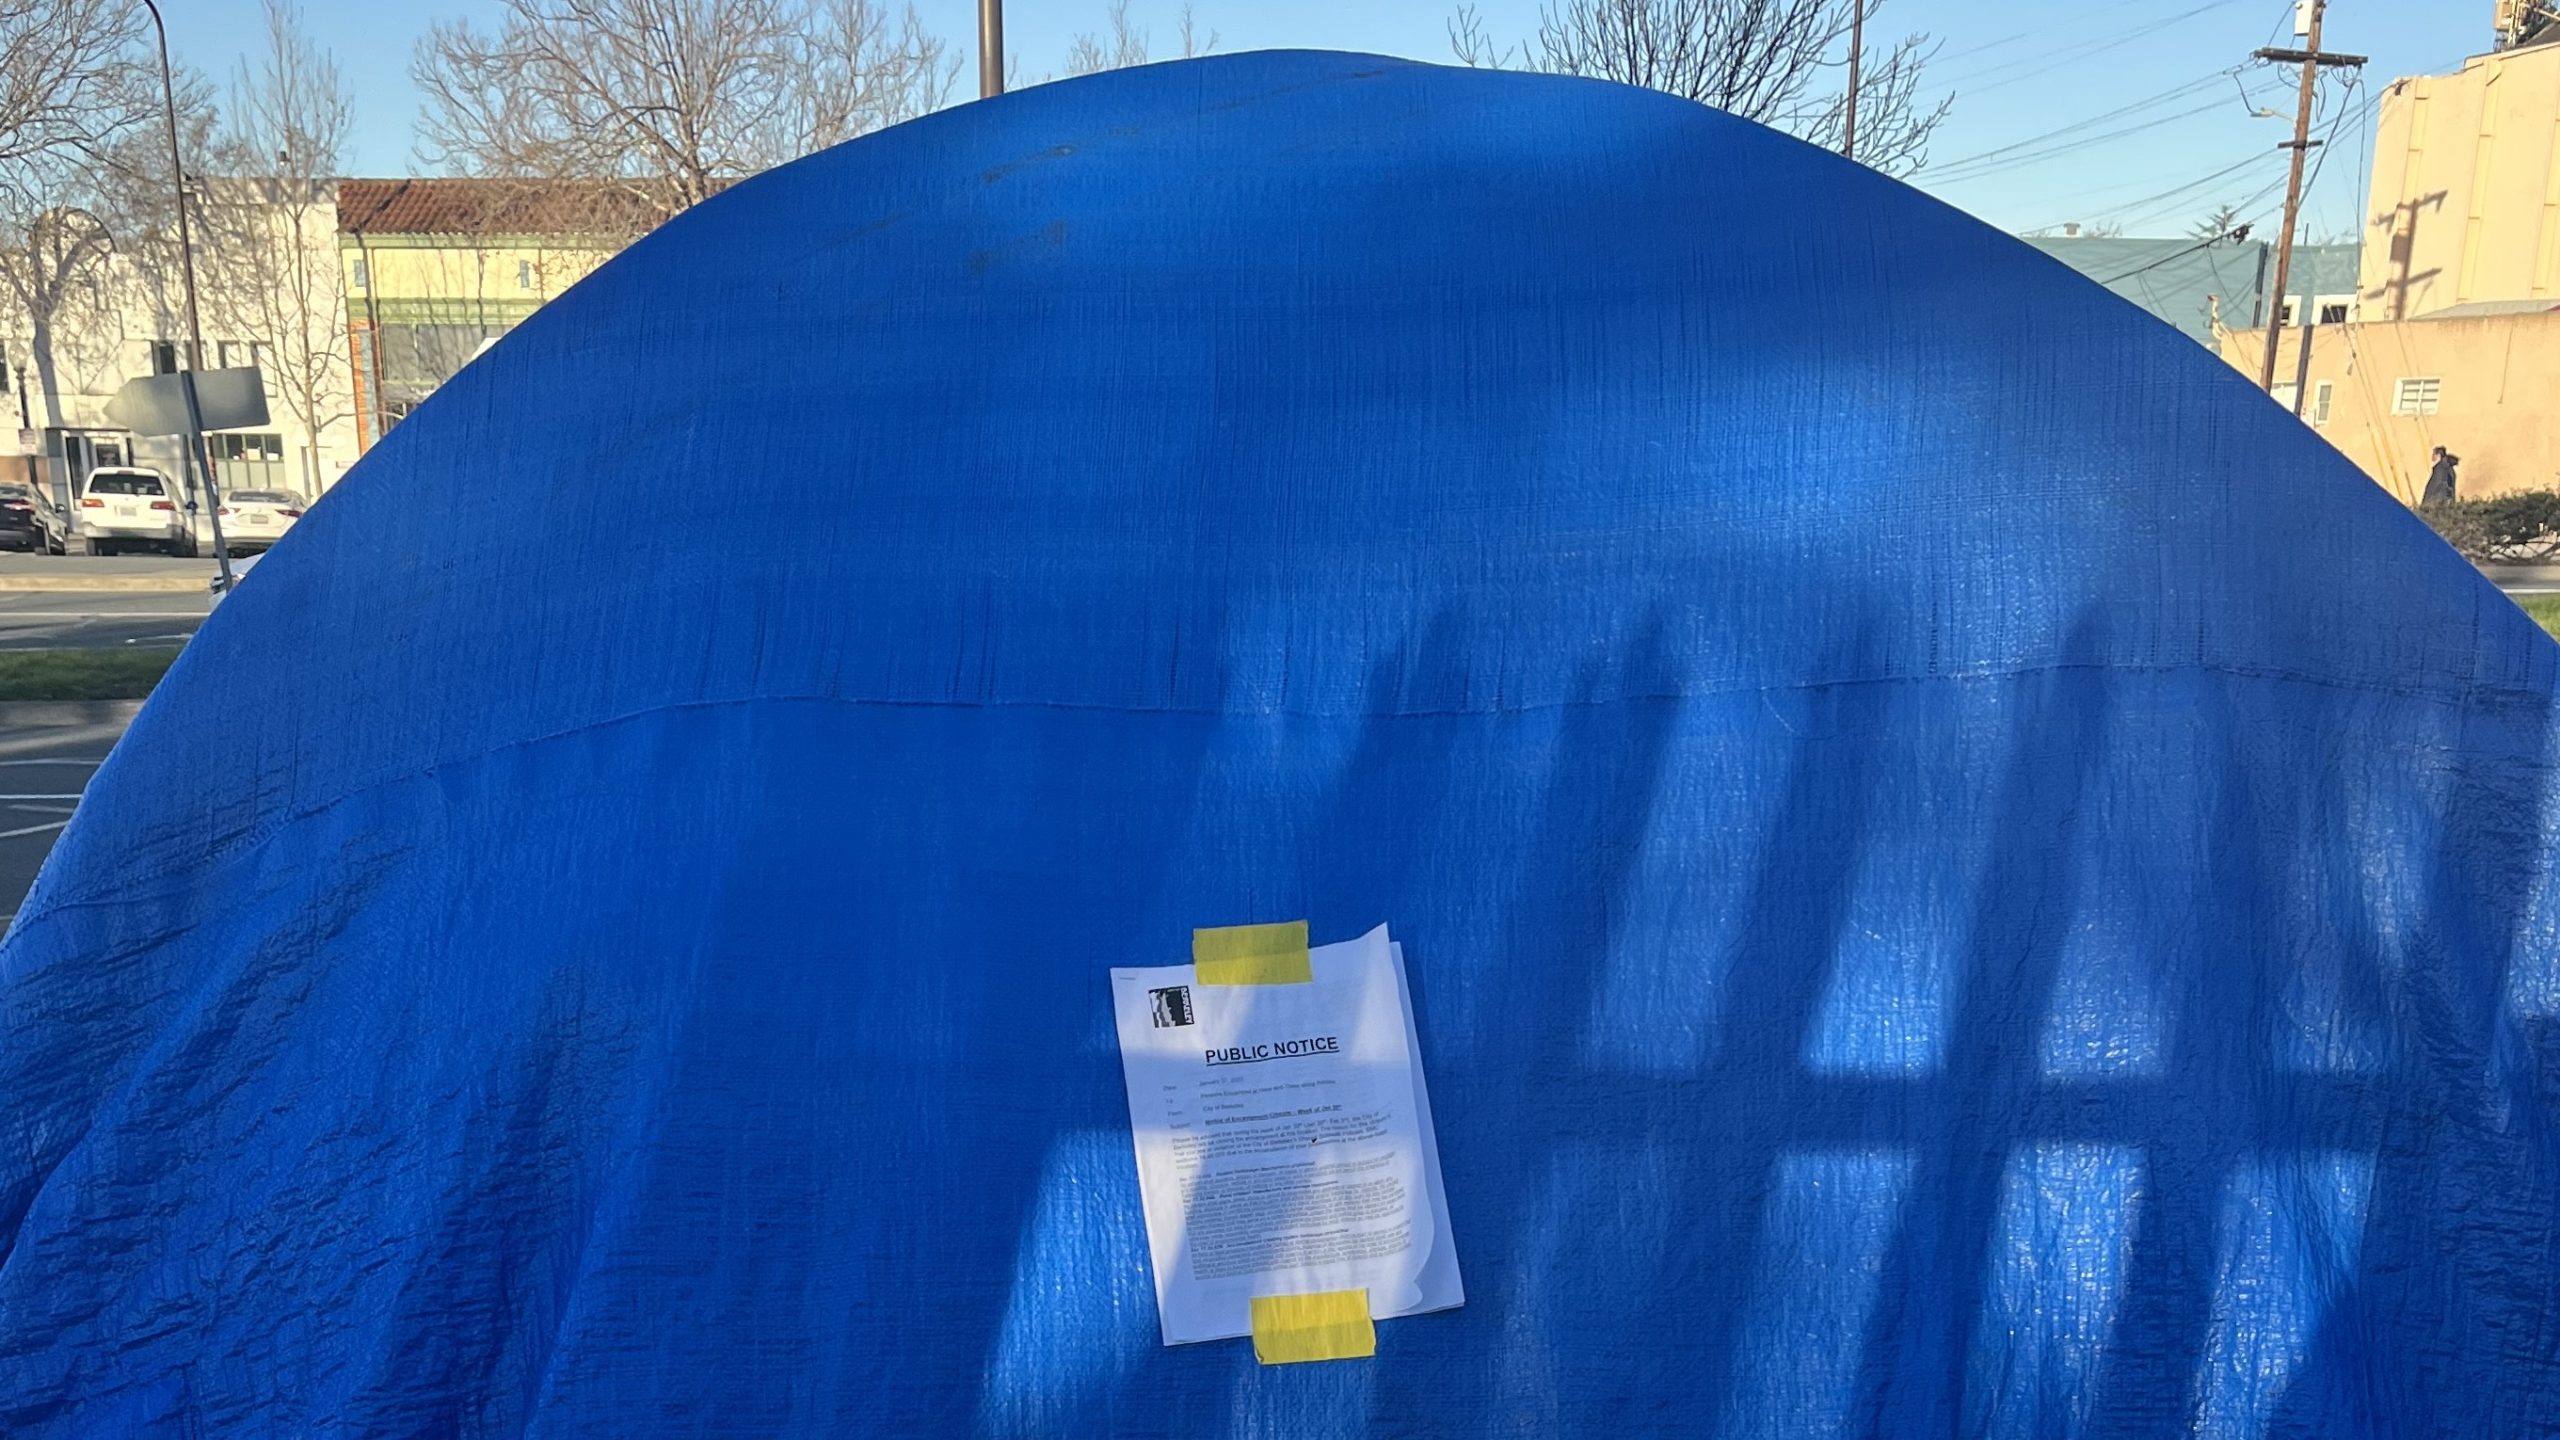 A tent from the Here There camp in South Berkeley marked with a public notice to vacate, January 31, 2023.